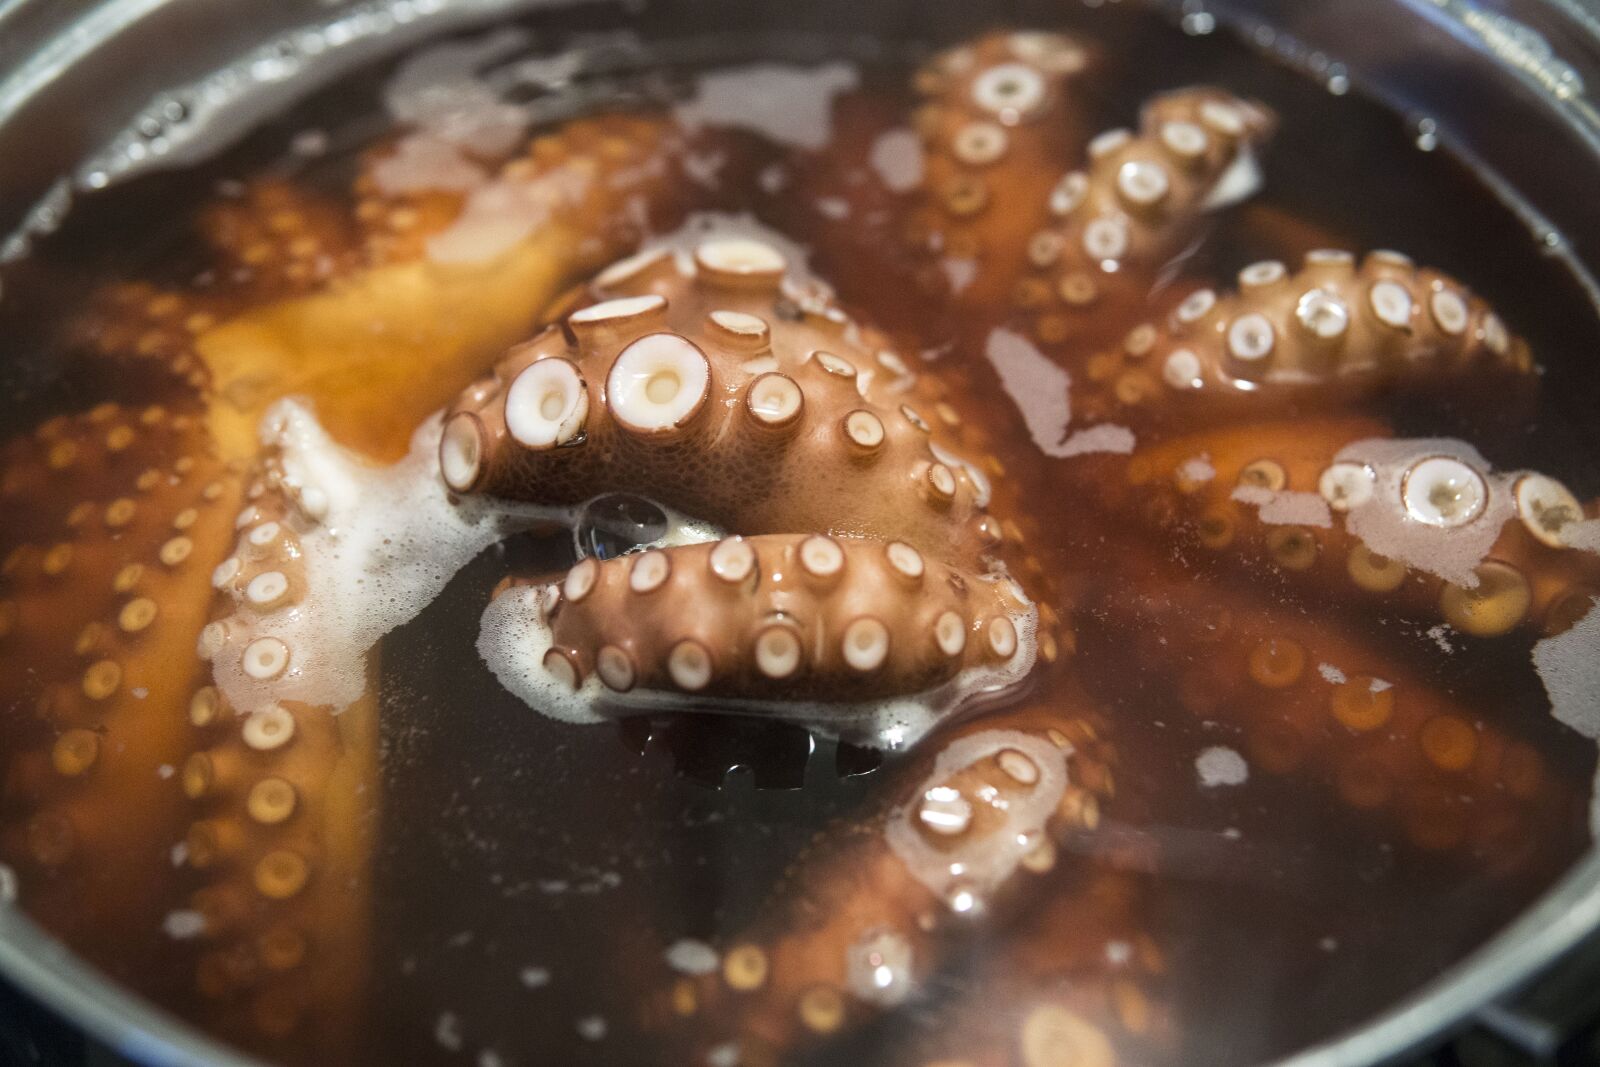 Sony a6000 sample photo. Octopus, cooking, delicious photography